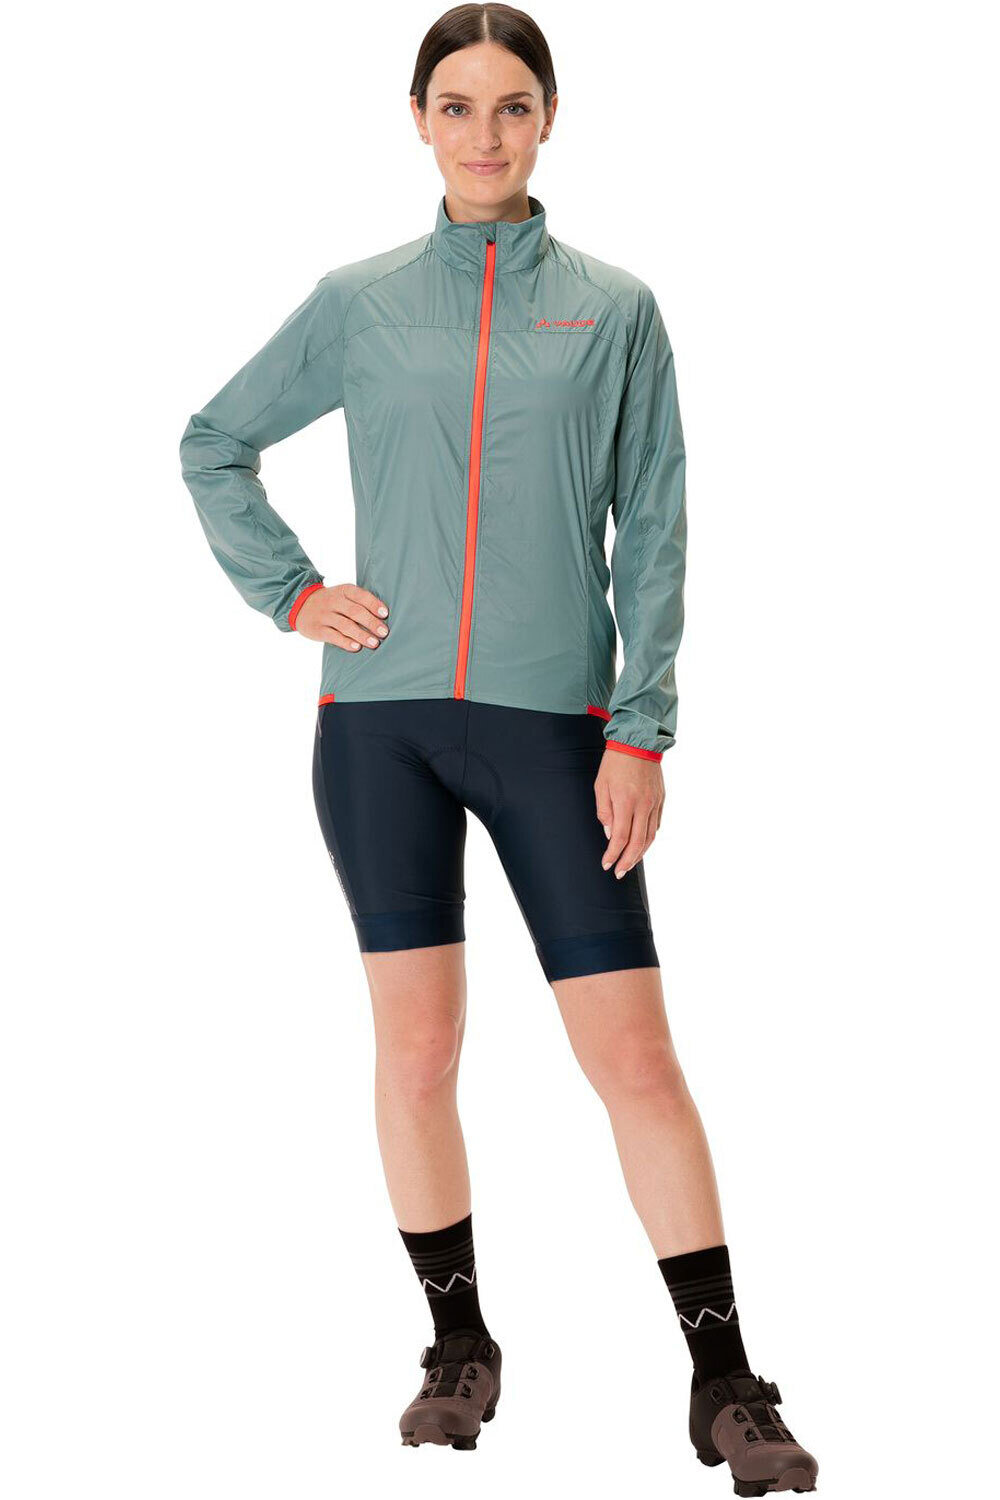 Vaude chaqueta impermeable ciclismo mujer Women's Air Jacket III 04